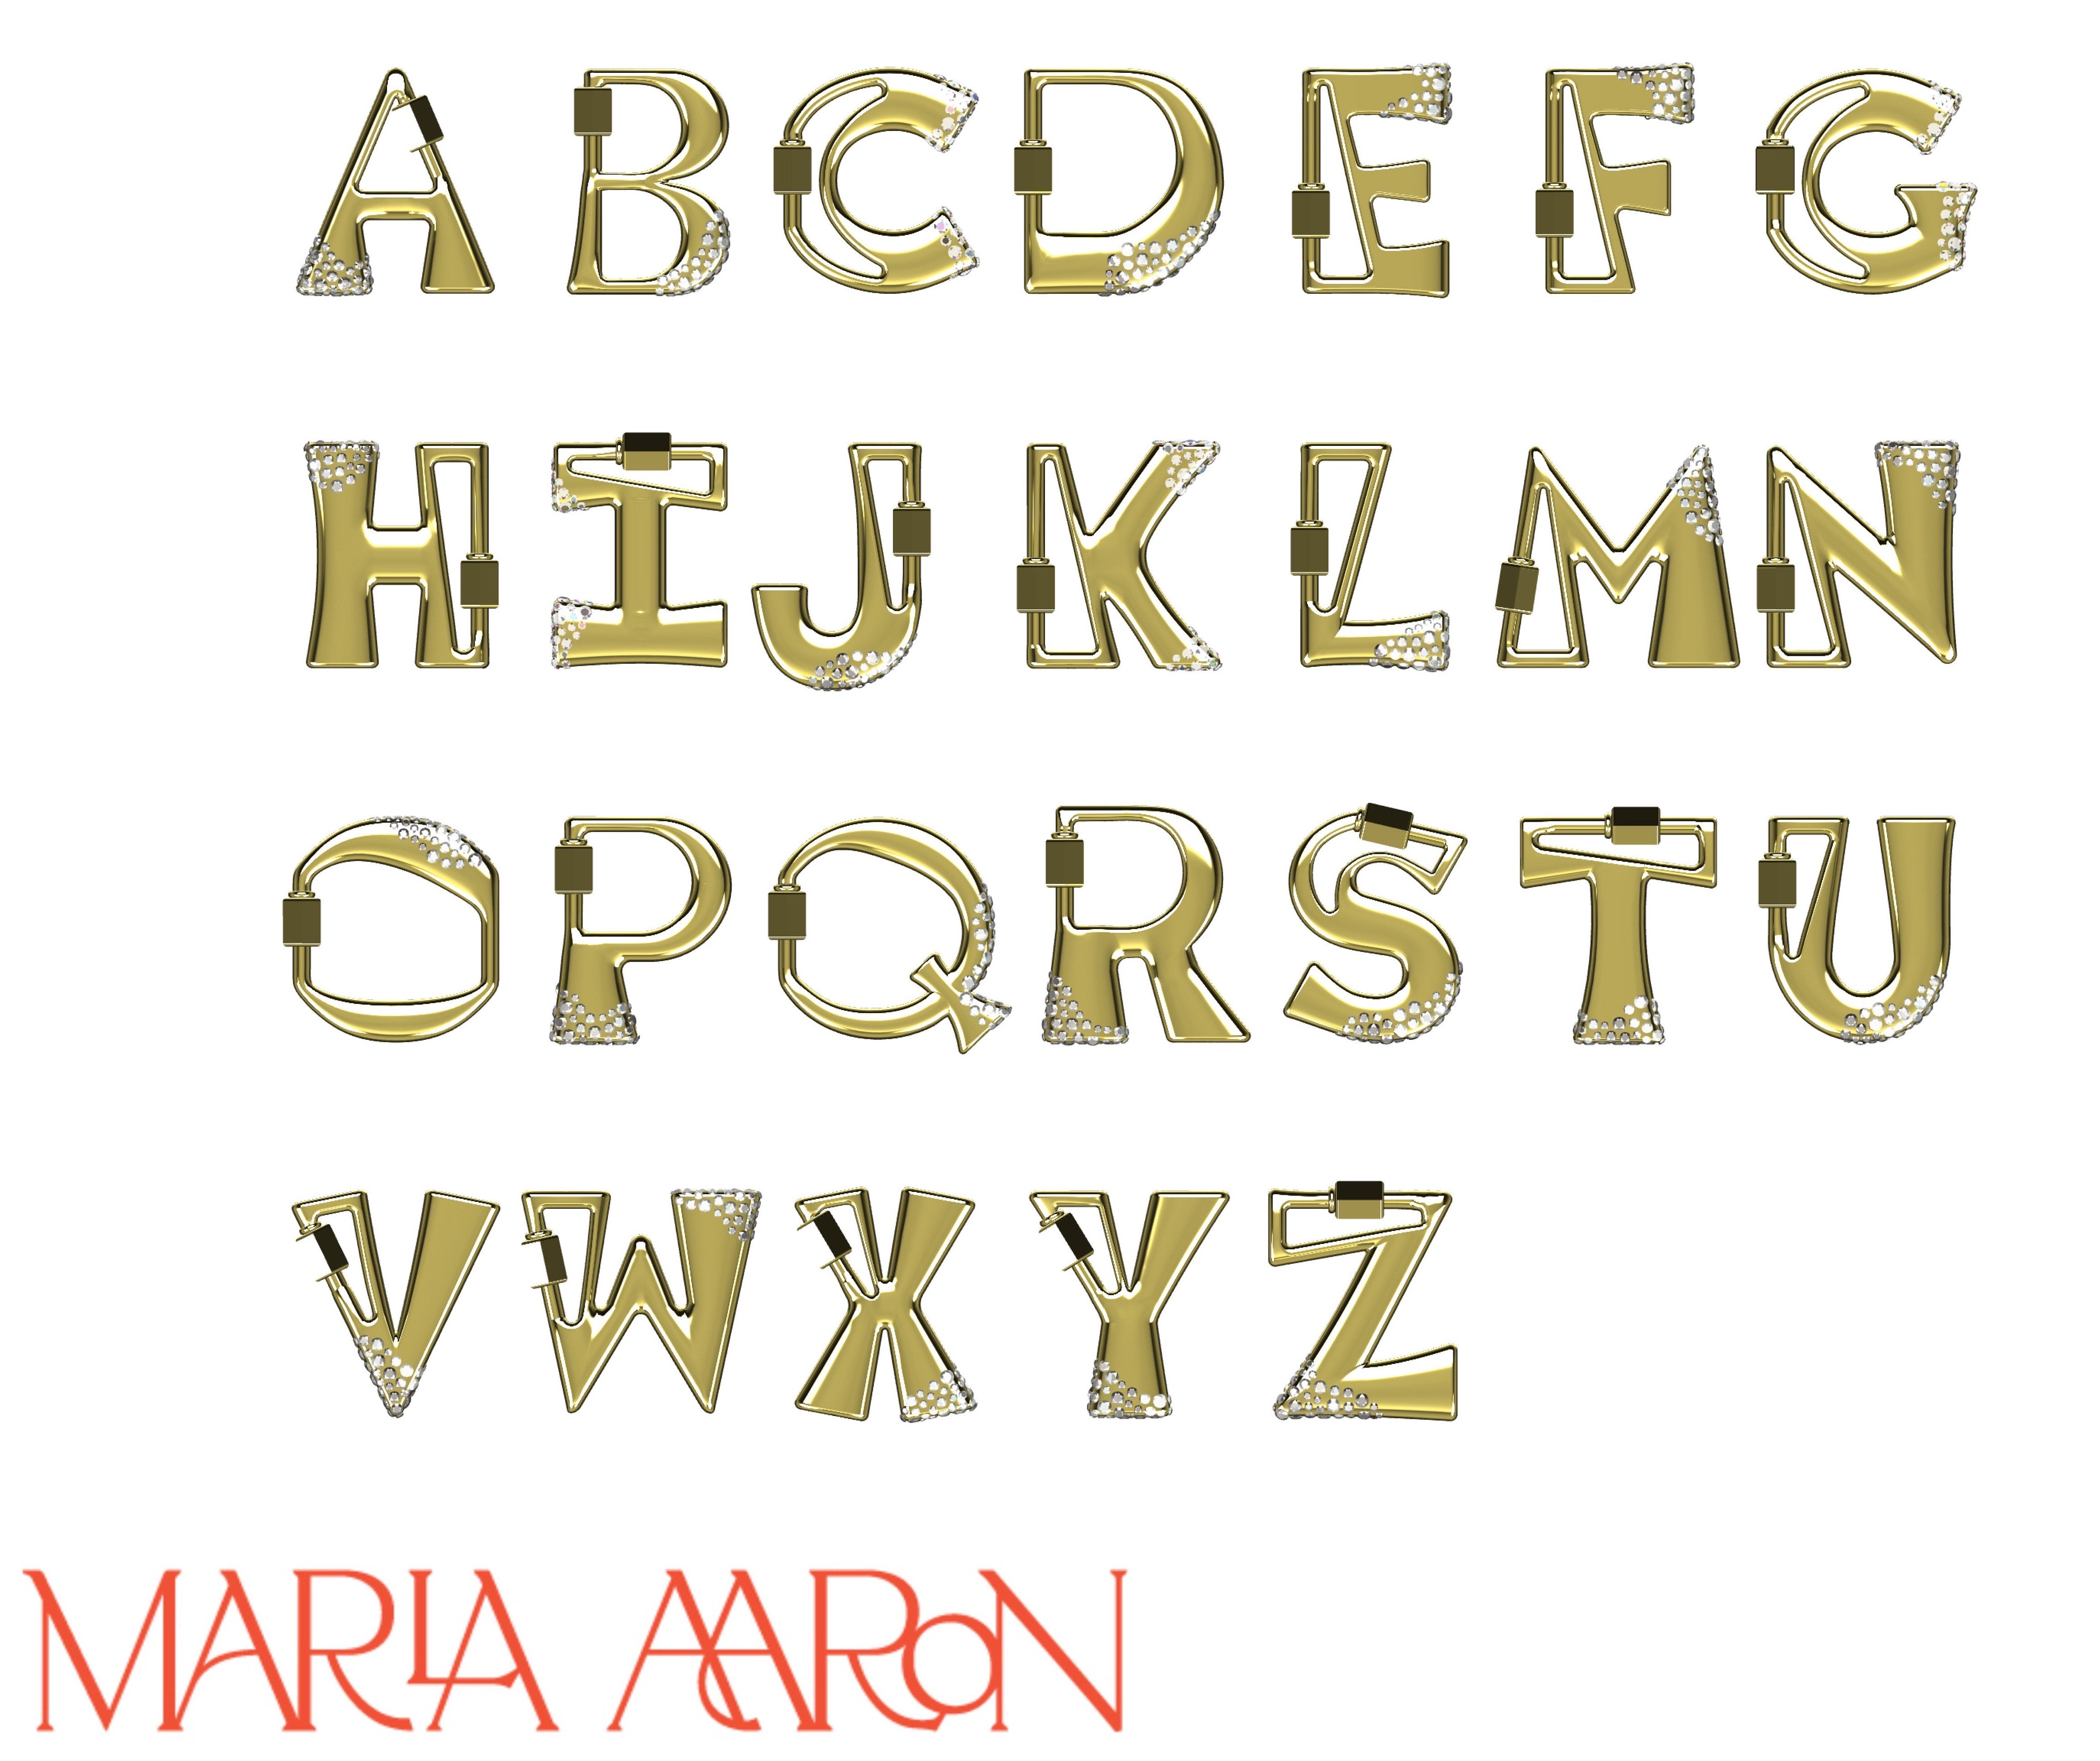 Gold locks of every letter of the alphabet including M charm against white backdrop with Marla Aaron logo in bottom left corner